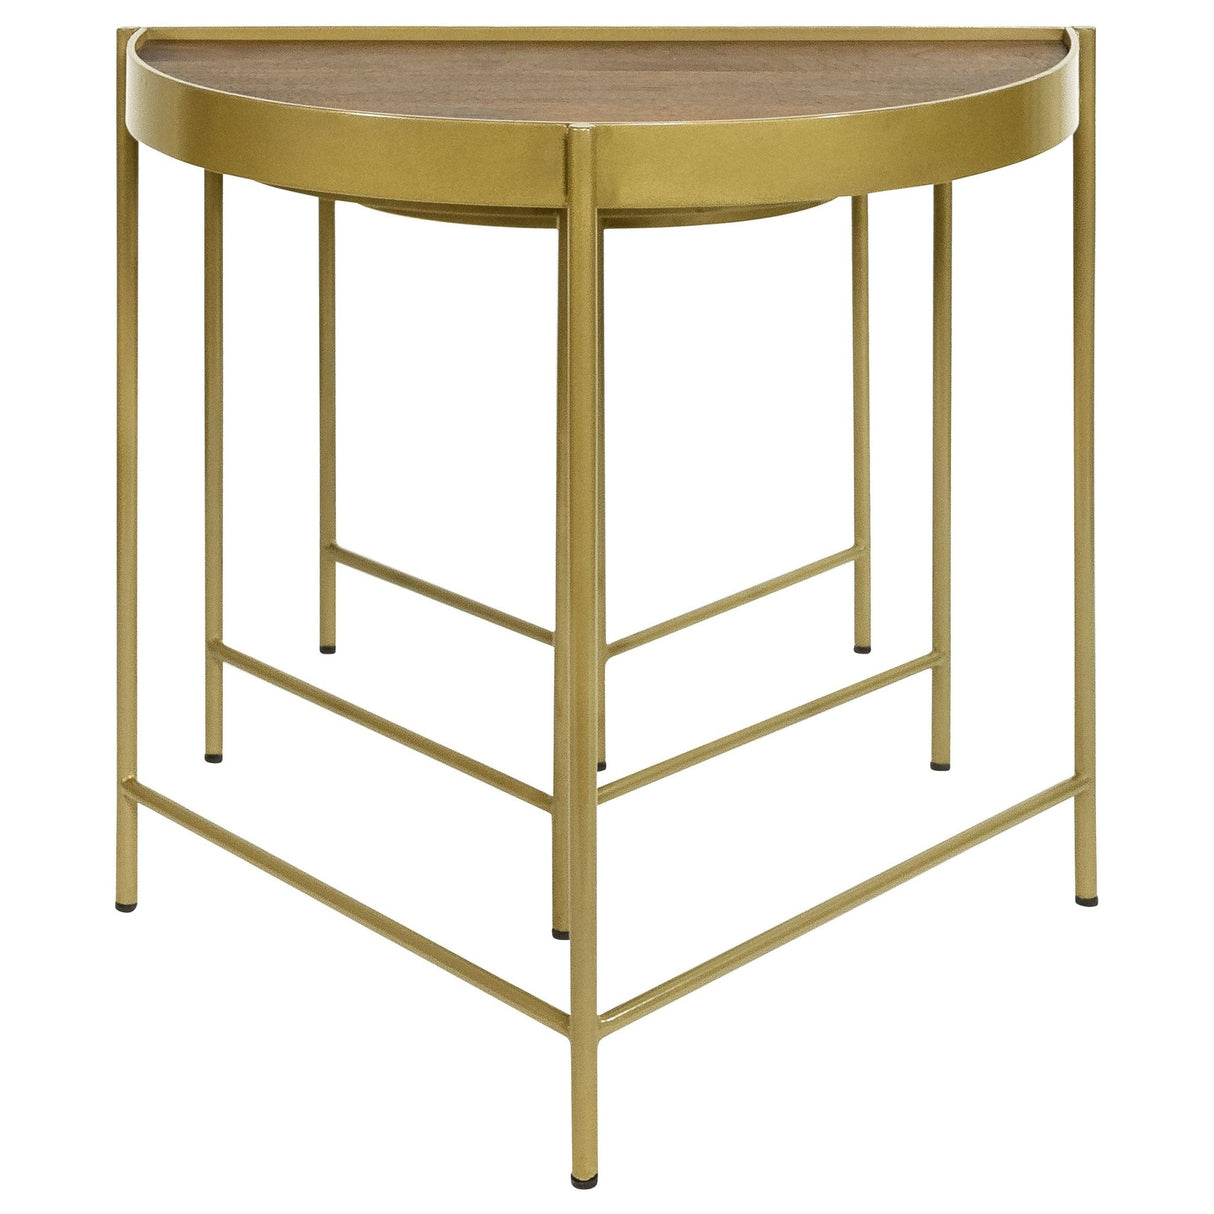 3 Pc Nesting Table - Tristen 3-Piece Demilune Nesting Table With Recessed Top Brown and Gold